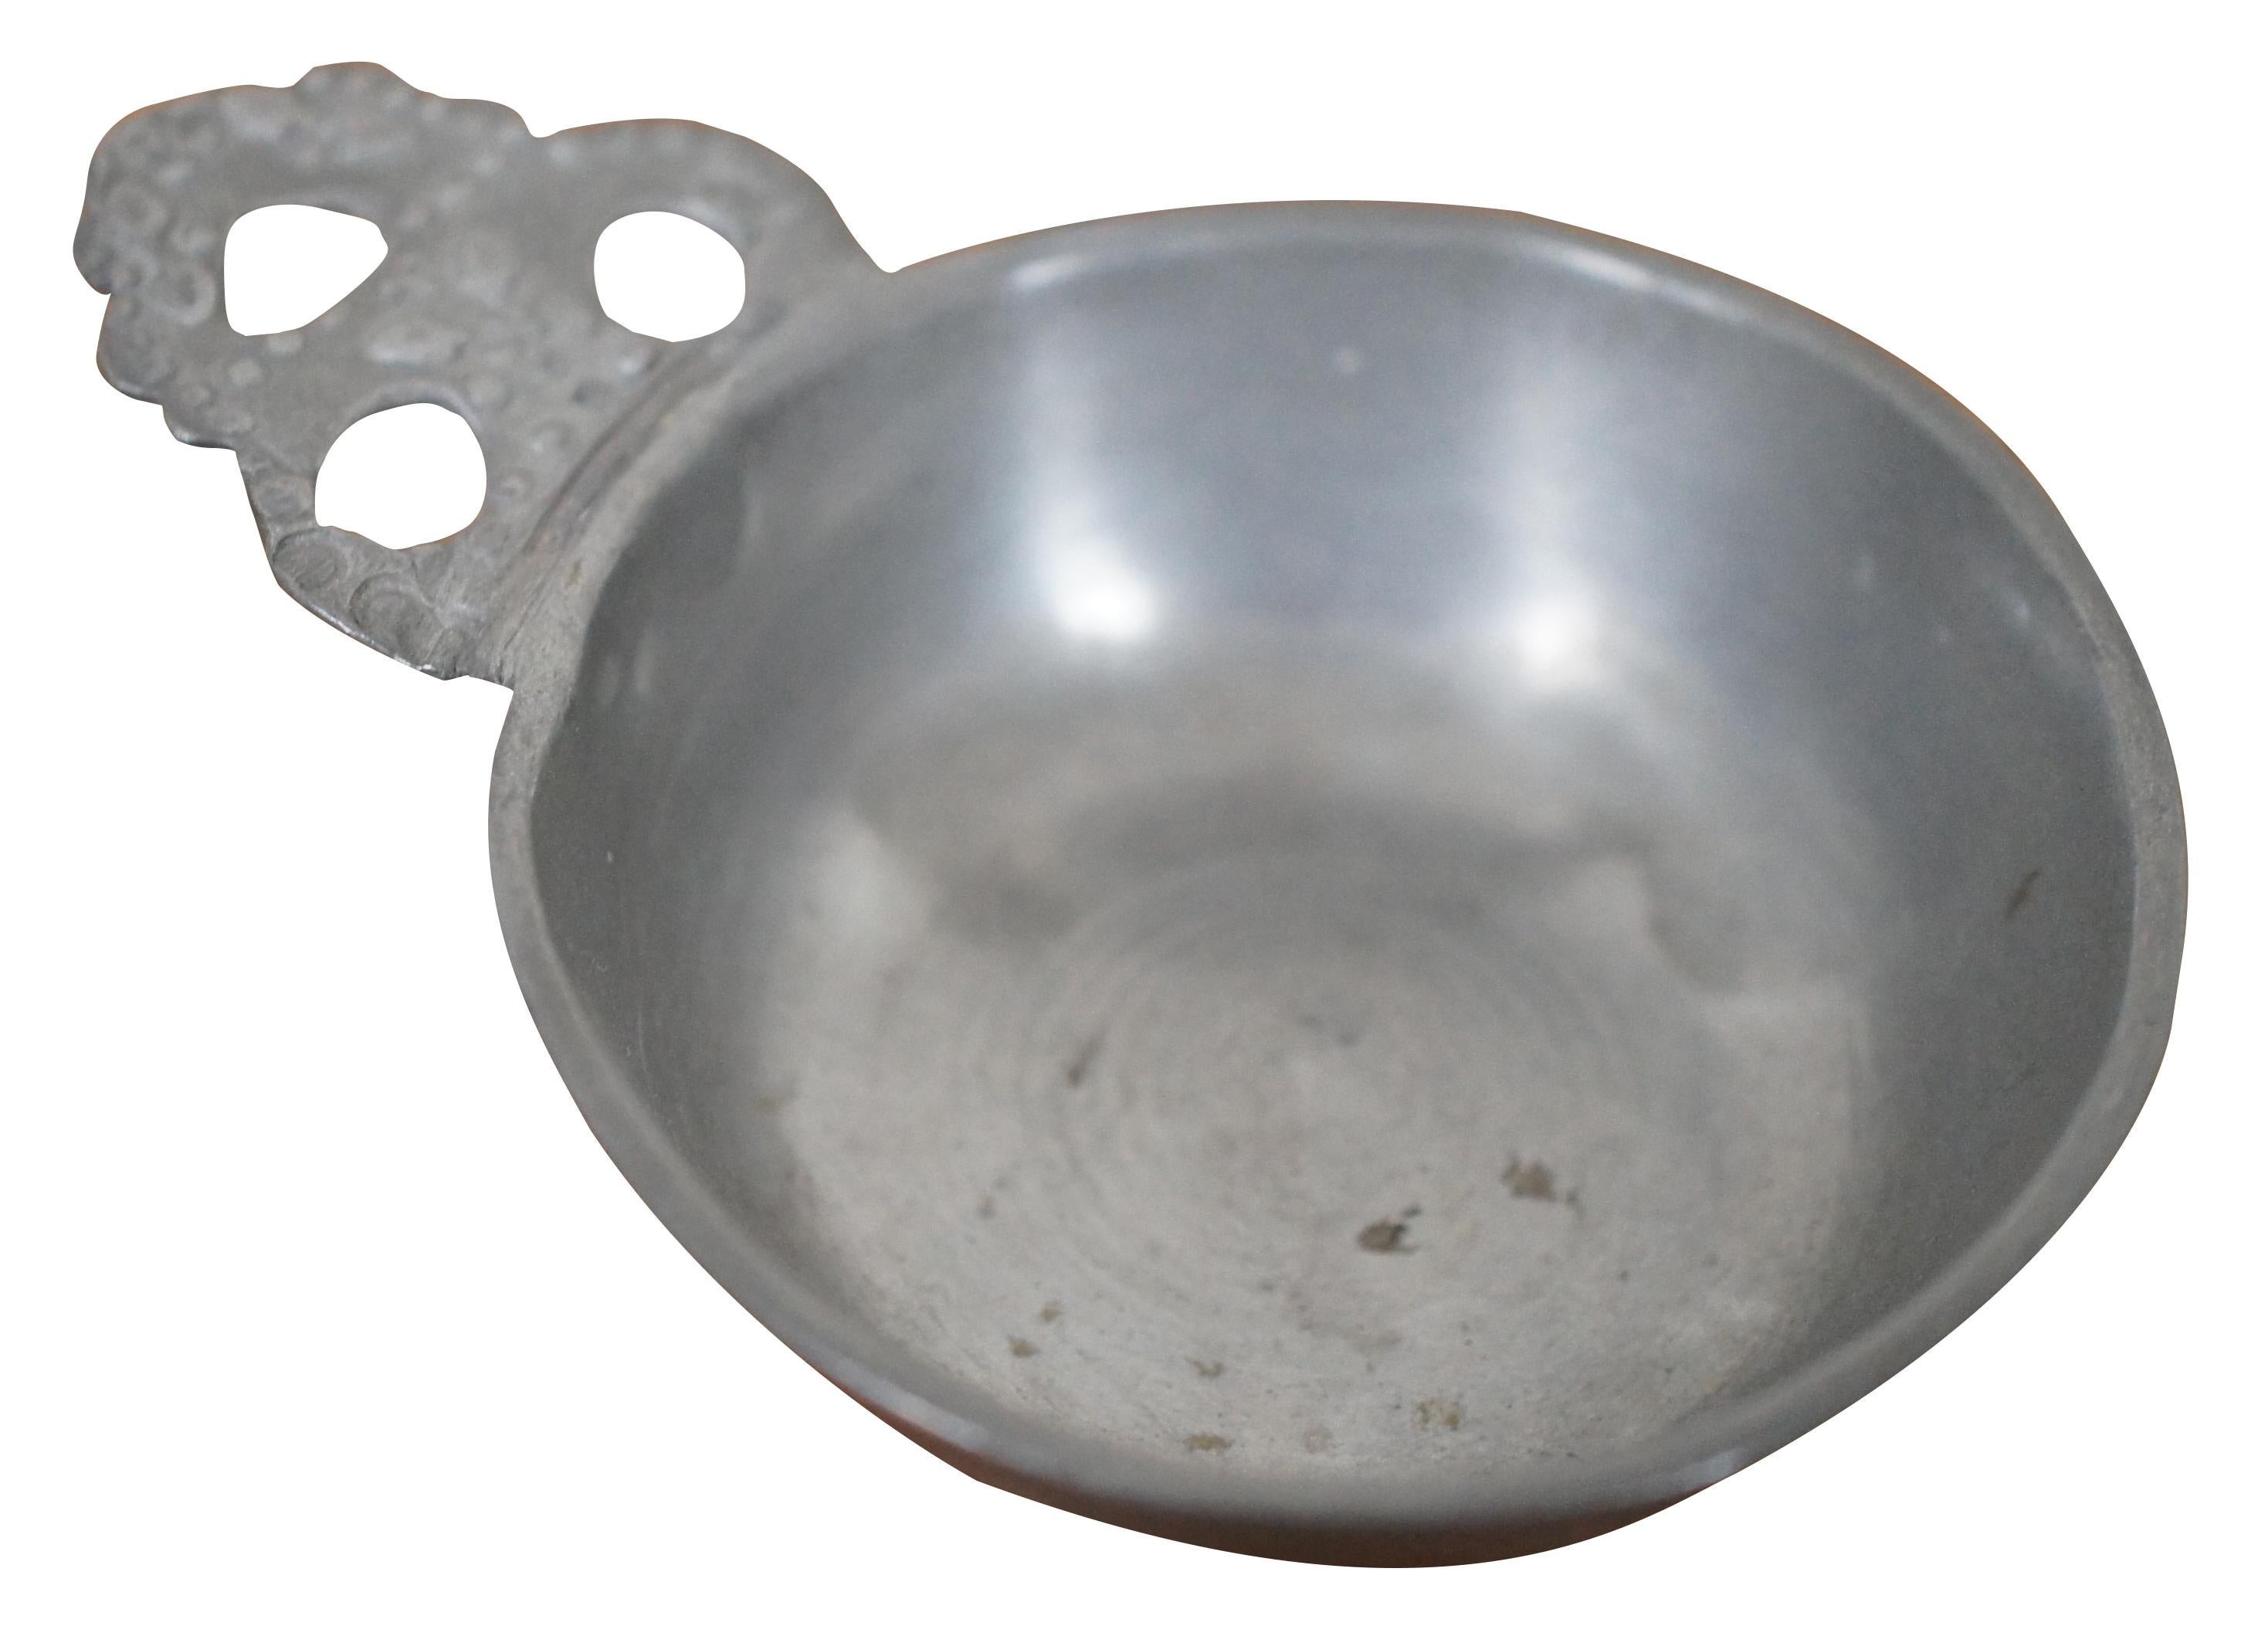 what is a porringer bowl used for